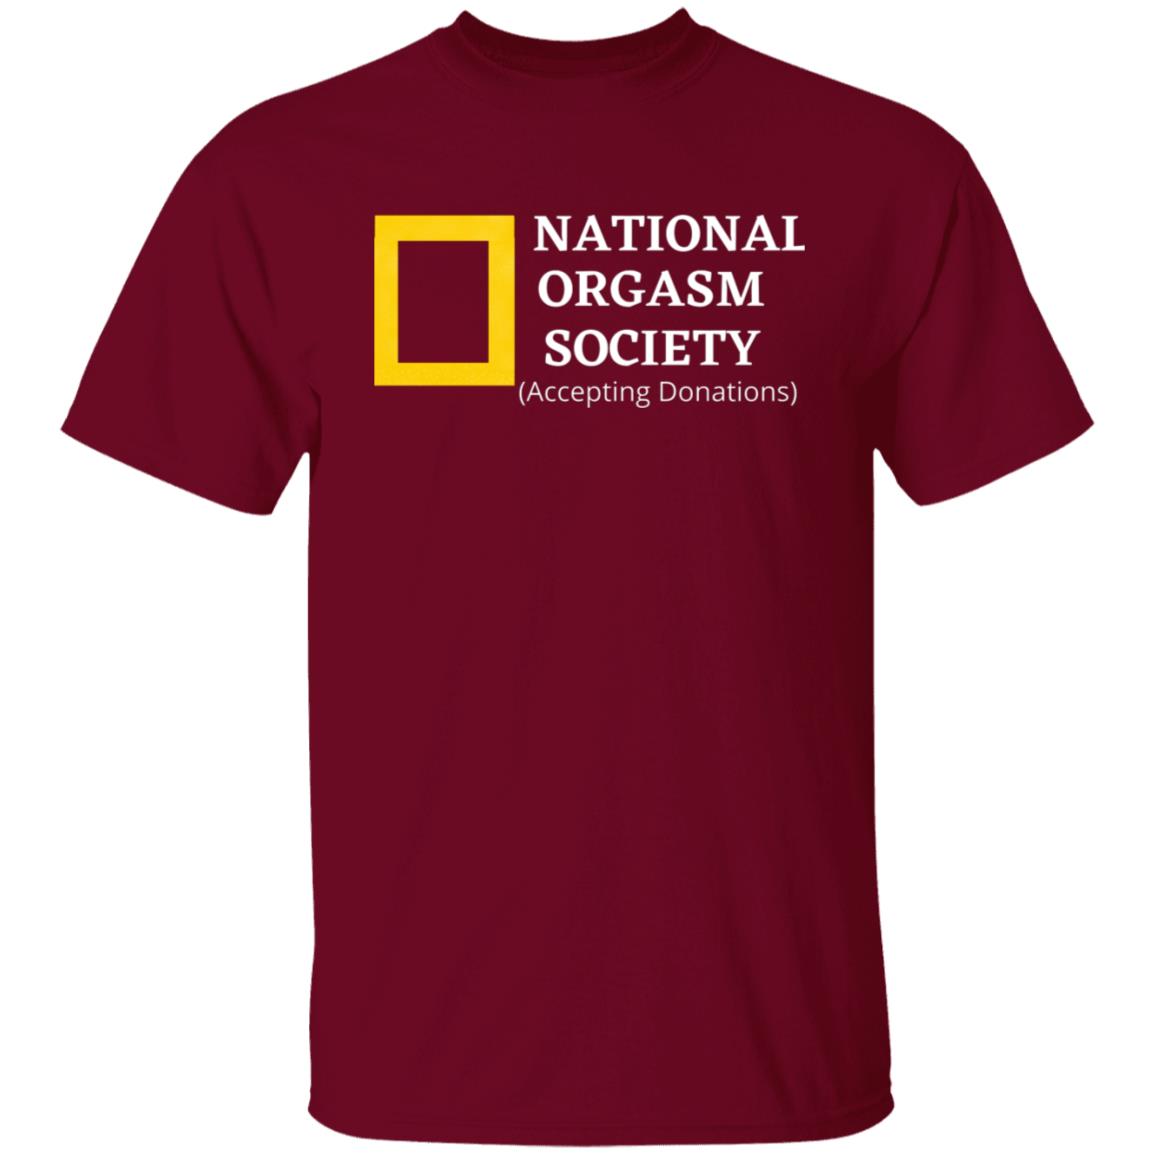 Adult Humor National Orgasm Society National Geographic Spoof T-Shirt Sarcastic Science Graphic Tee